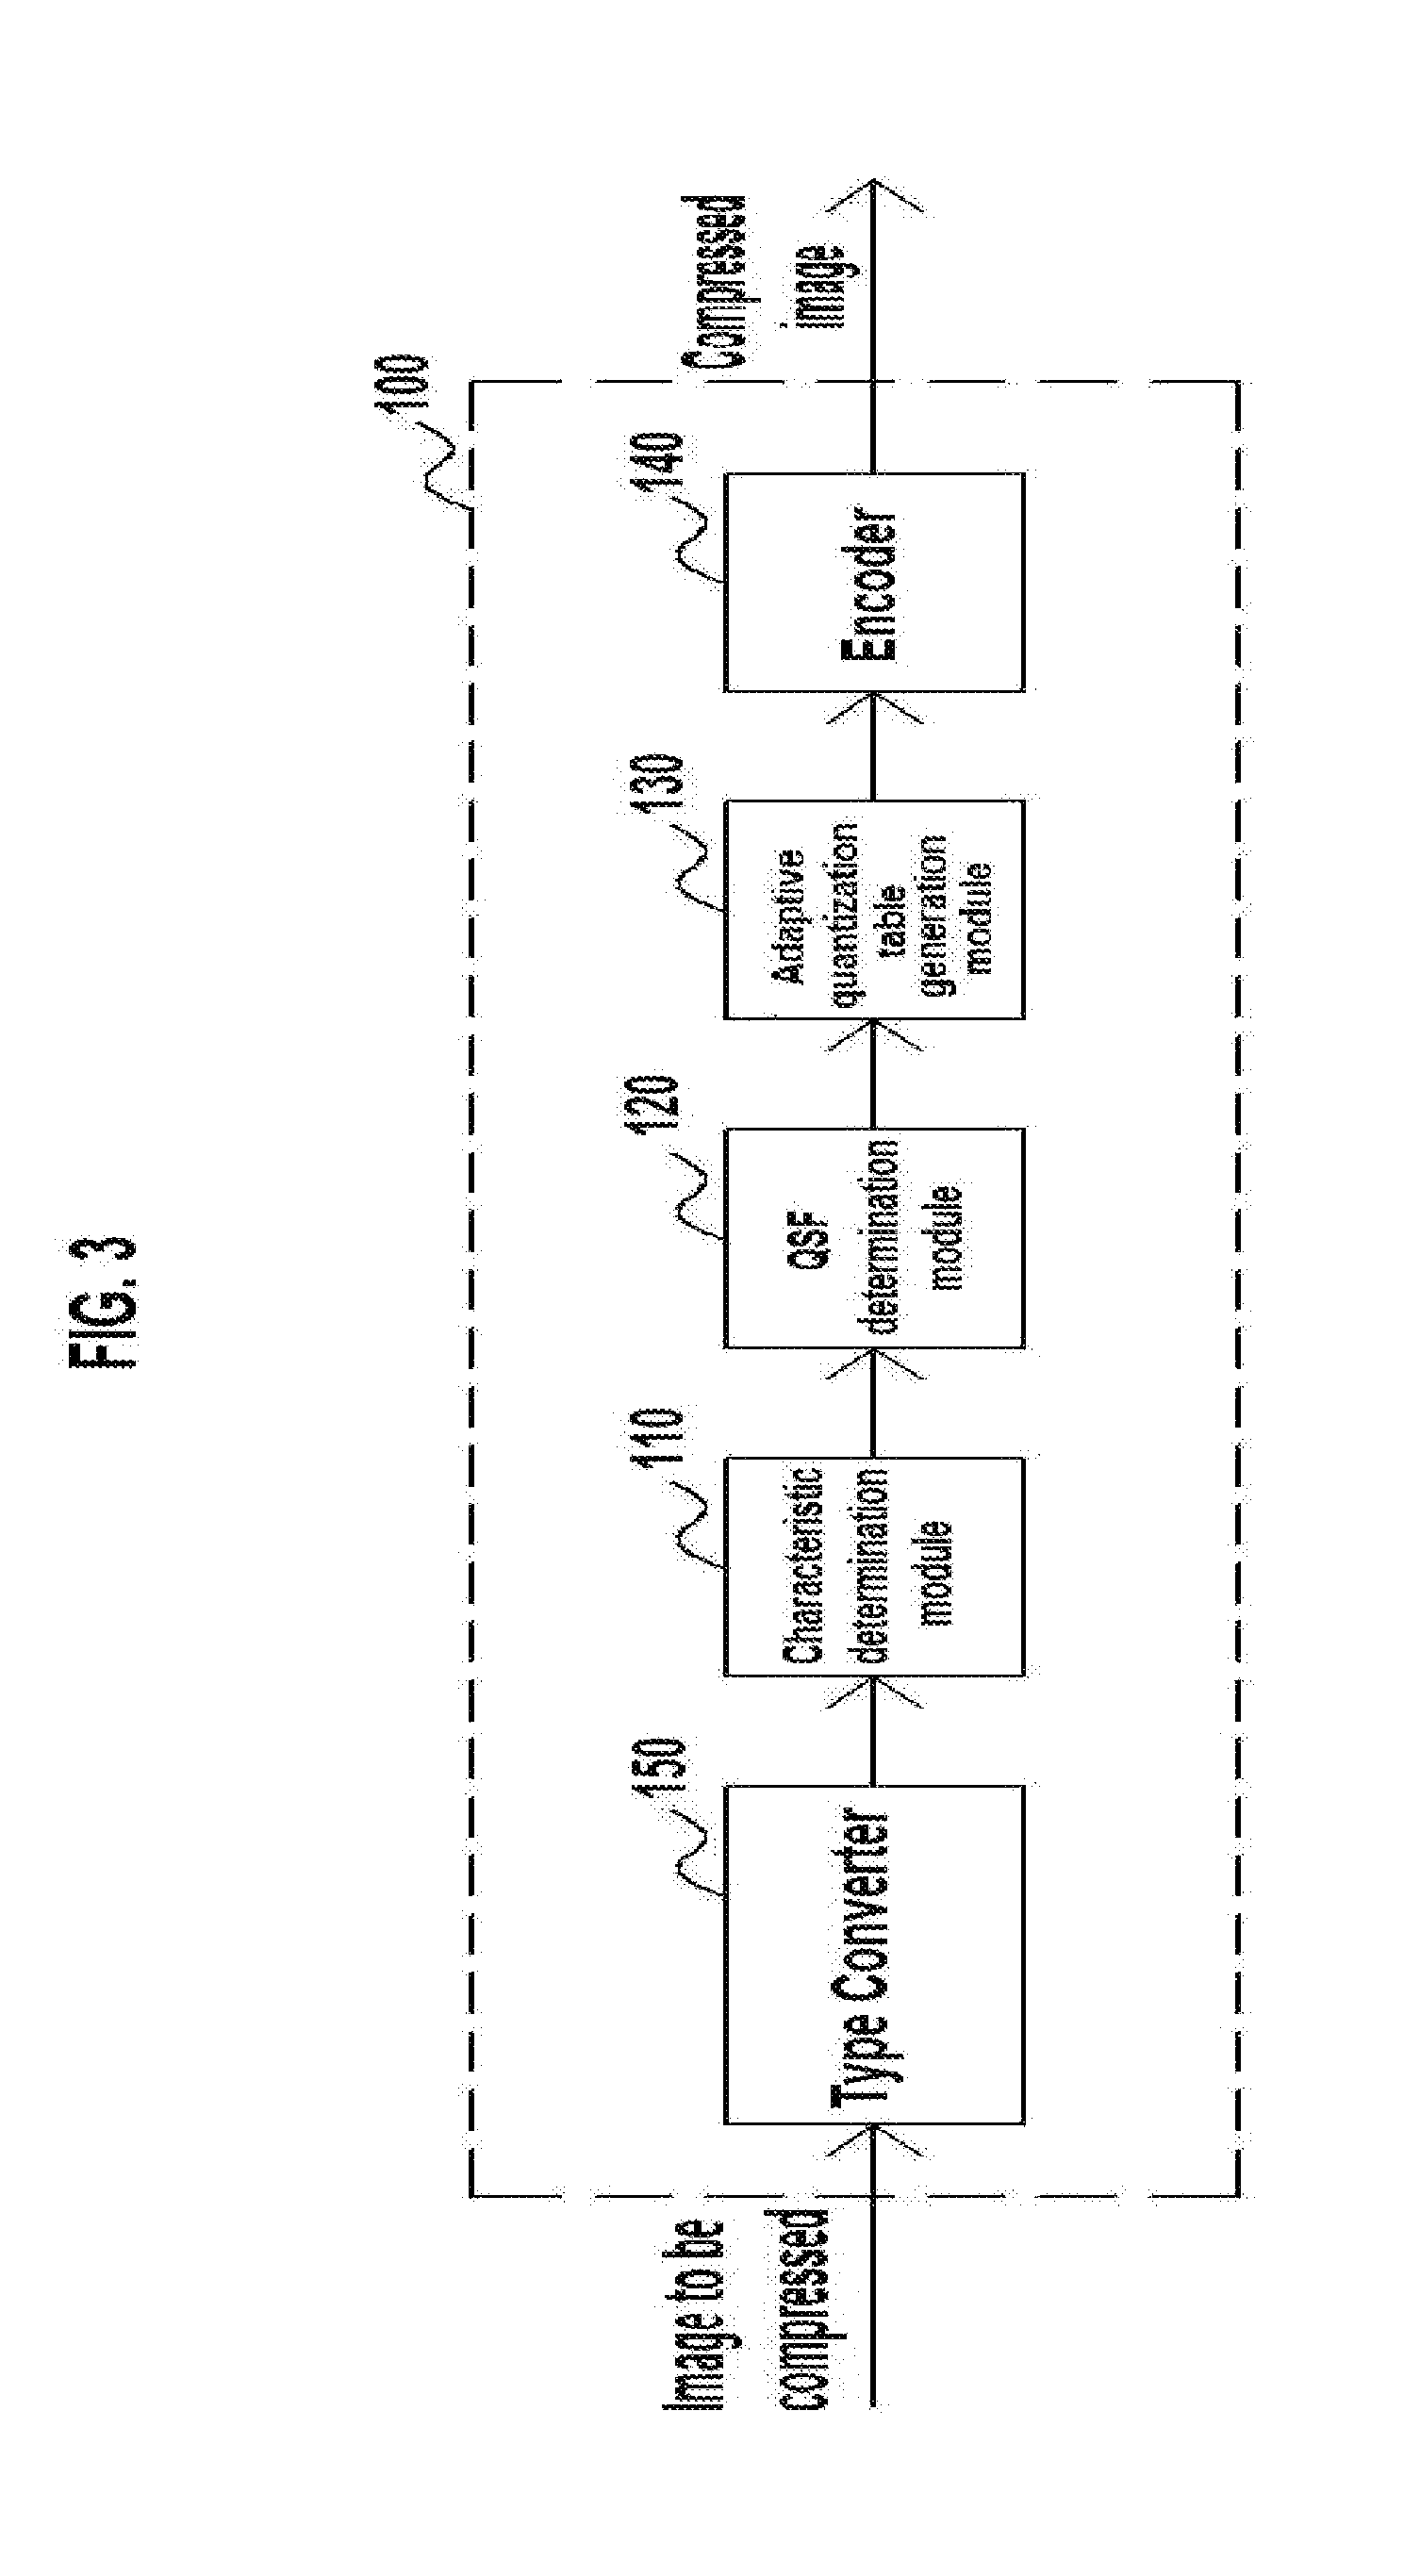 Adaptive image compression system and method